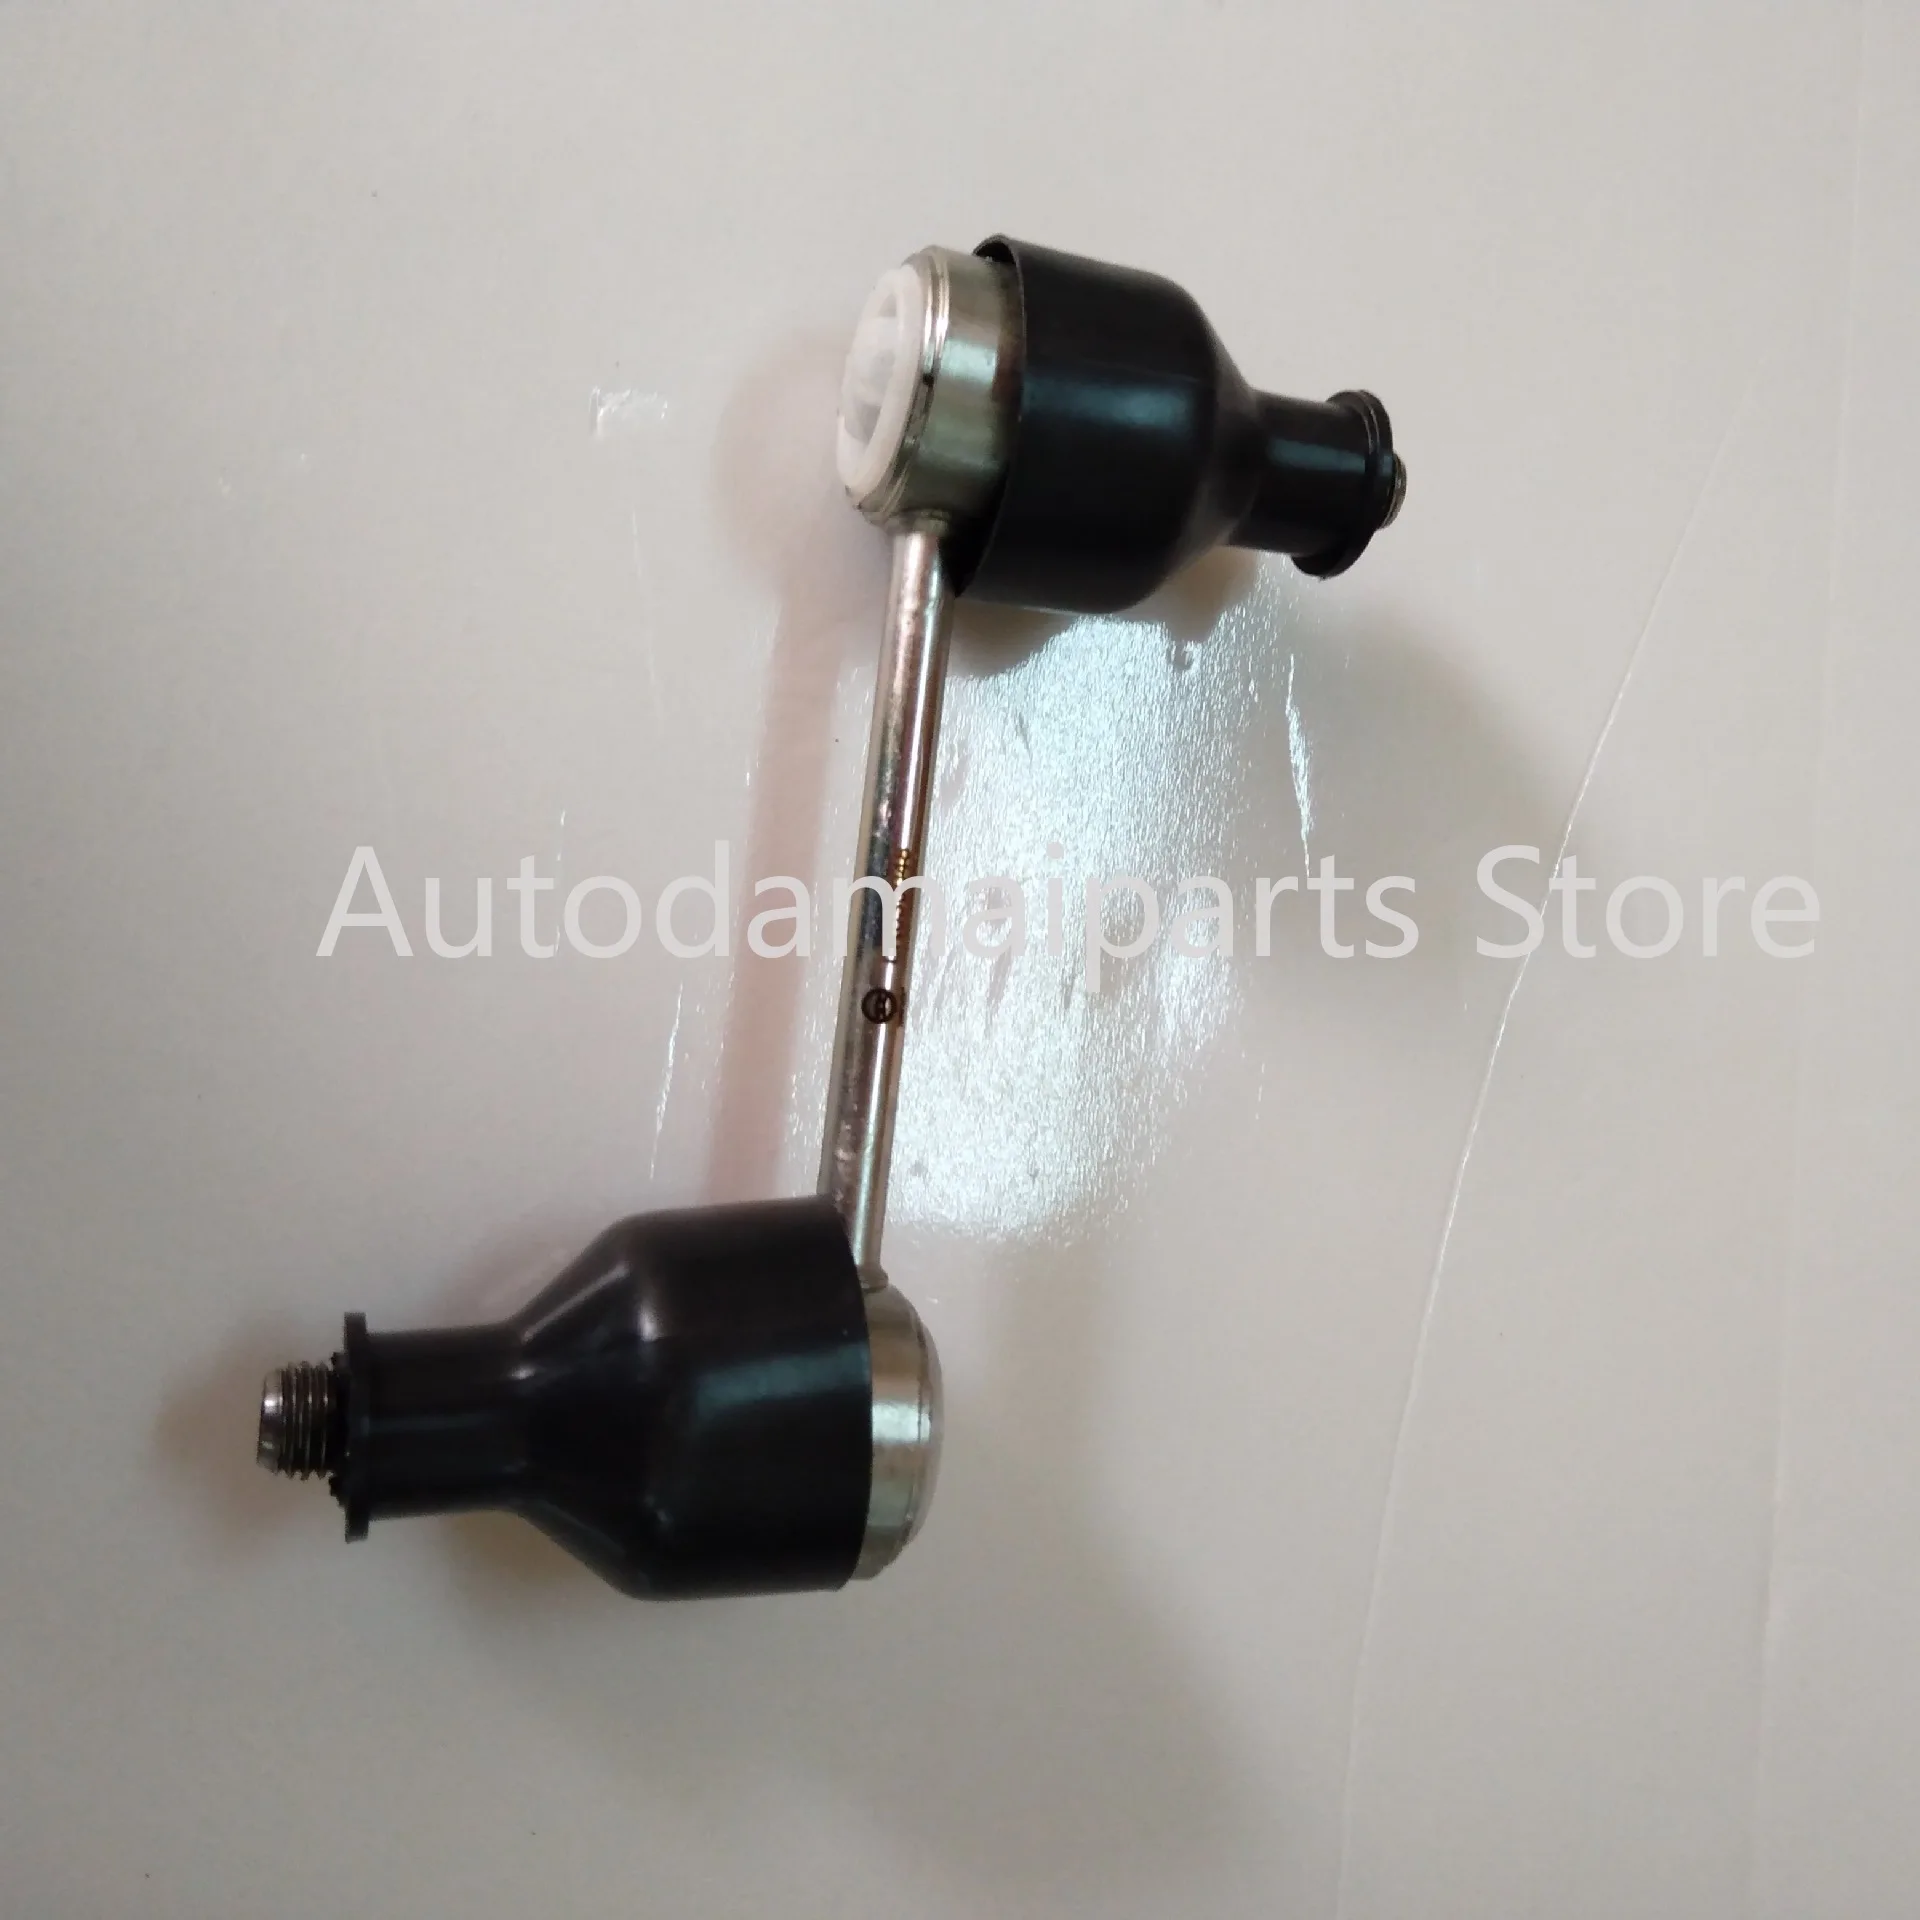 

LR030048 auto rear cross member stabilizer bar link for Range Rover 02-09/10-12 car link auto connecting rod spare parts